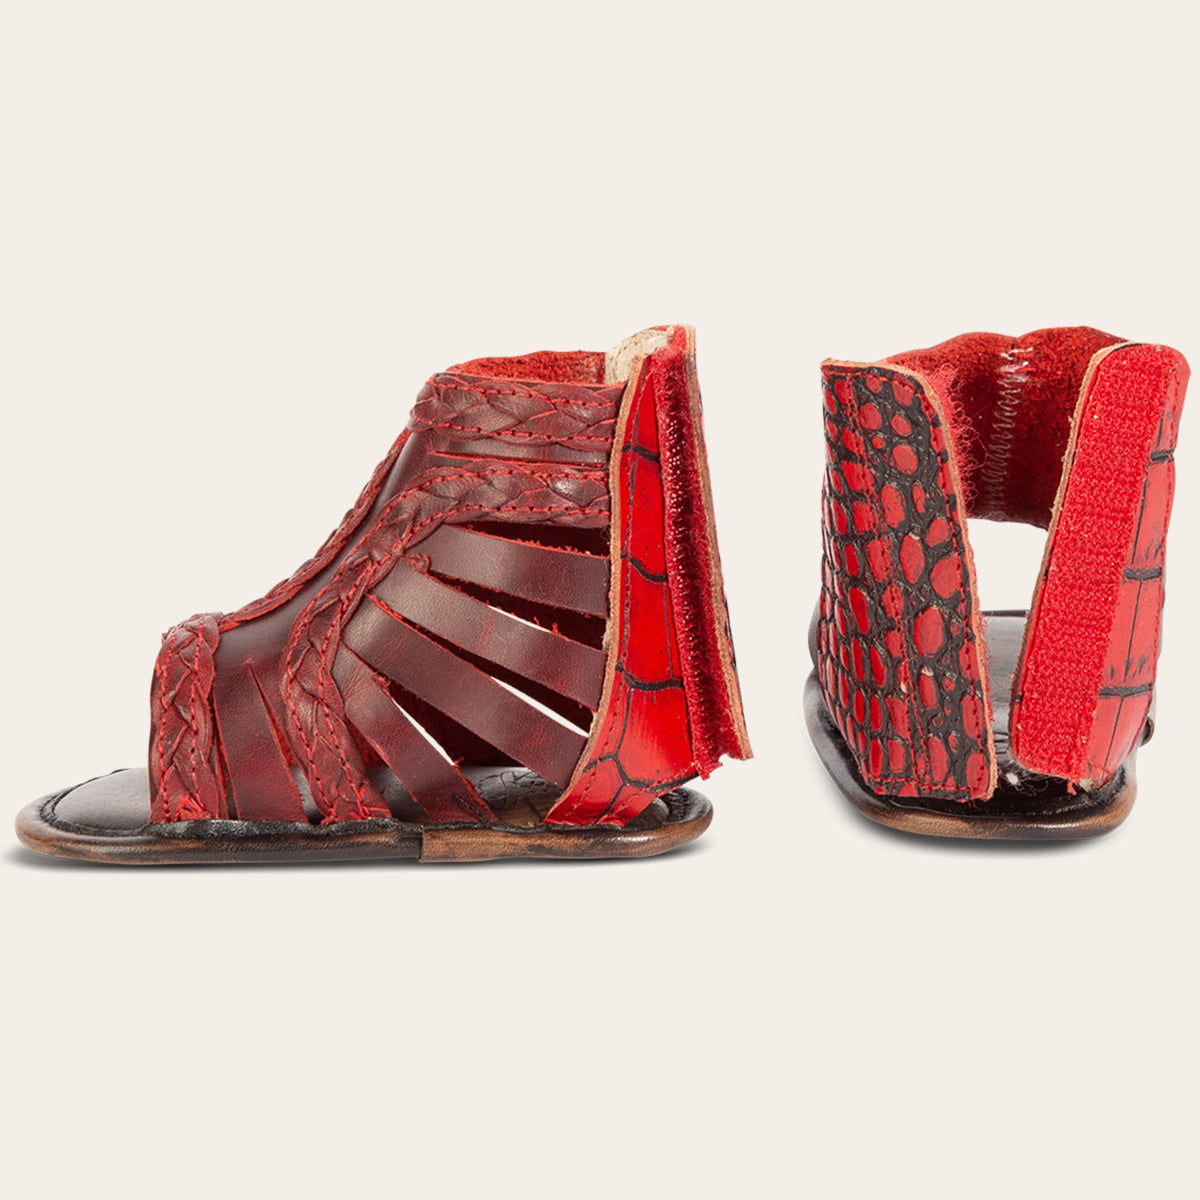 side and back view showing laser-cut leather, braided accents and embossed leather back velcro panel on FREEBIRD infant baby bela red leather sandal